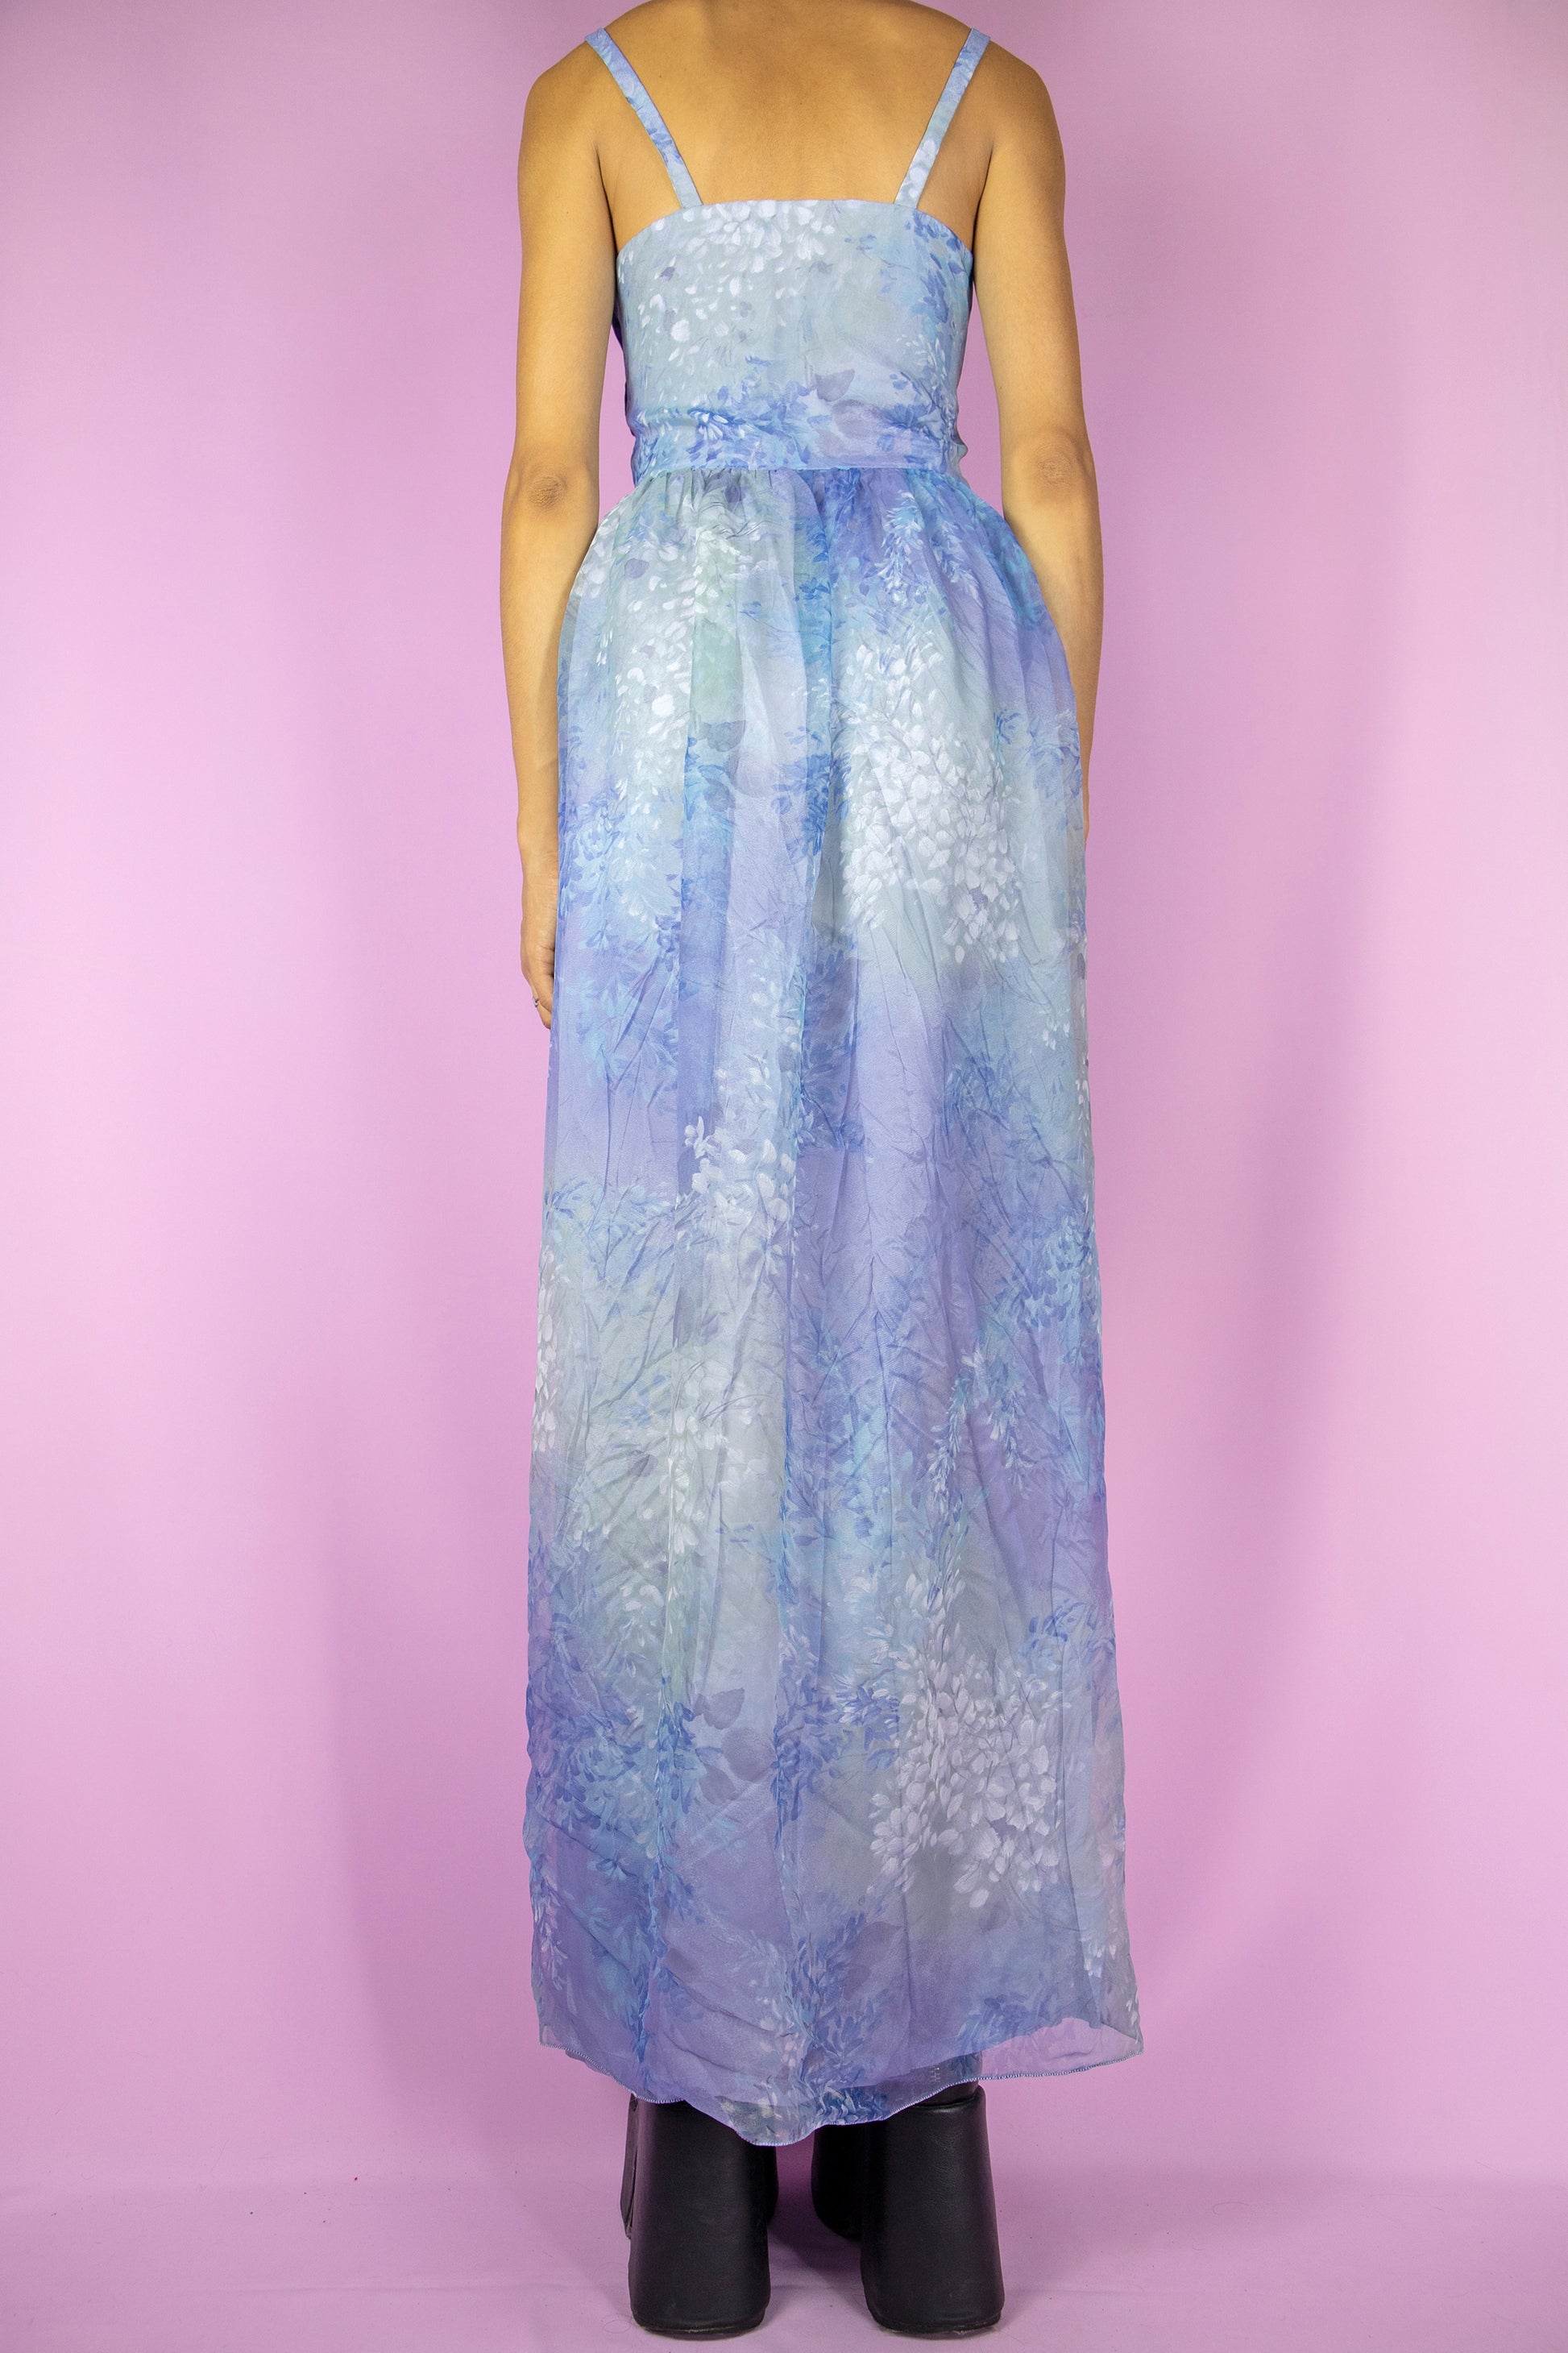 The Vintage 90s Party Floral Maxi Dress is a blue and lilac semi-sheer midi dress with ruched front, and a side zipper closure. Romantic 1990s evening cocktail party elegant summer maxi dress.